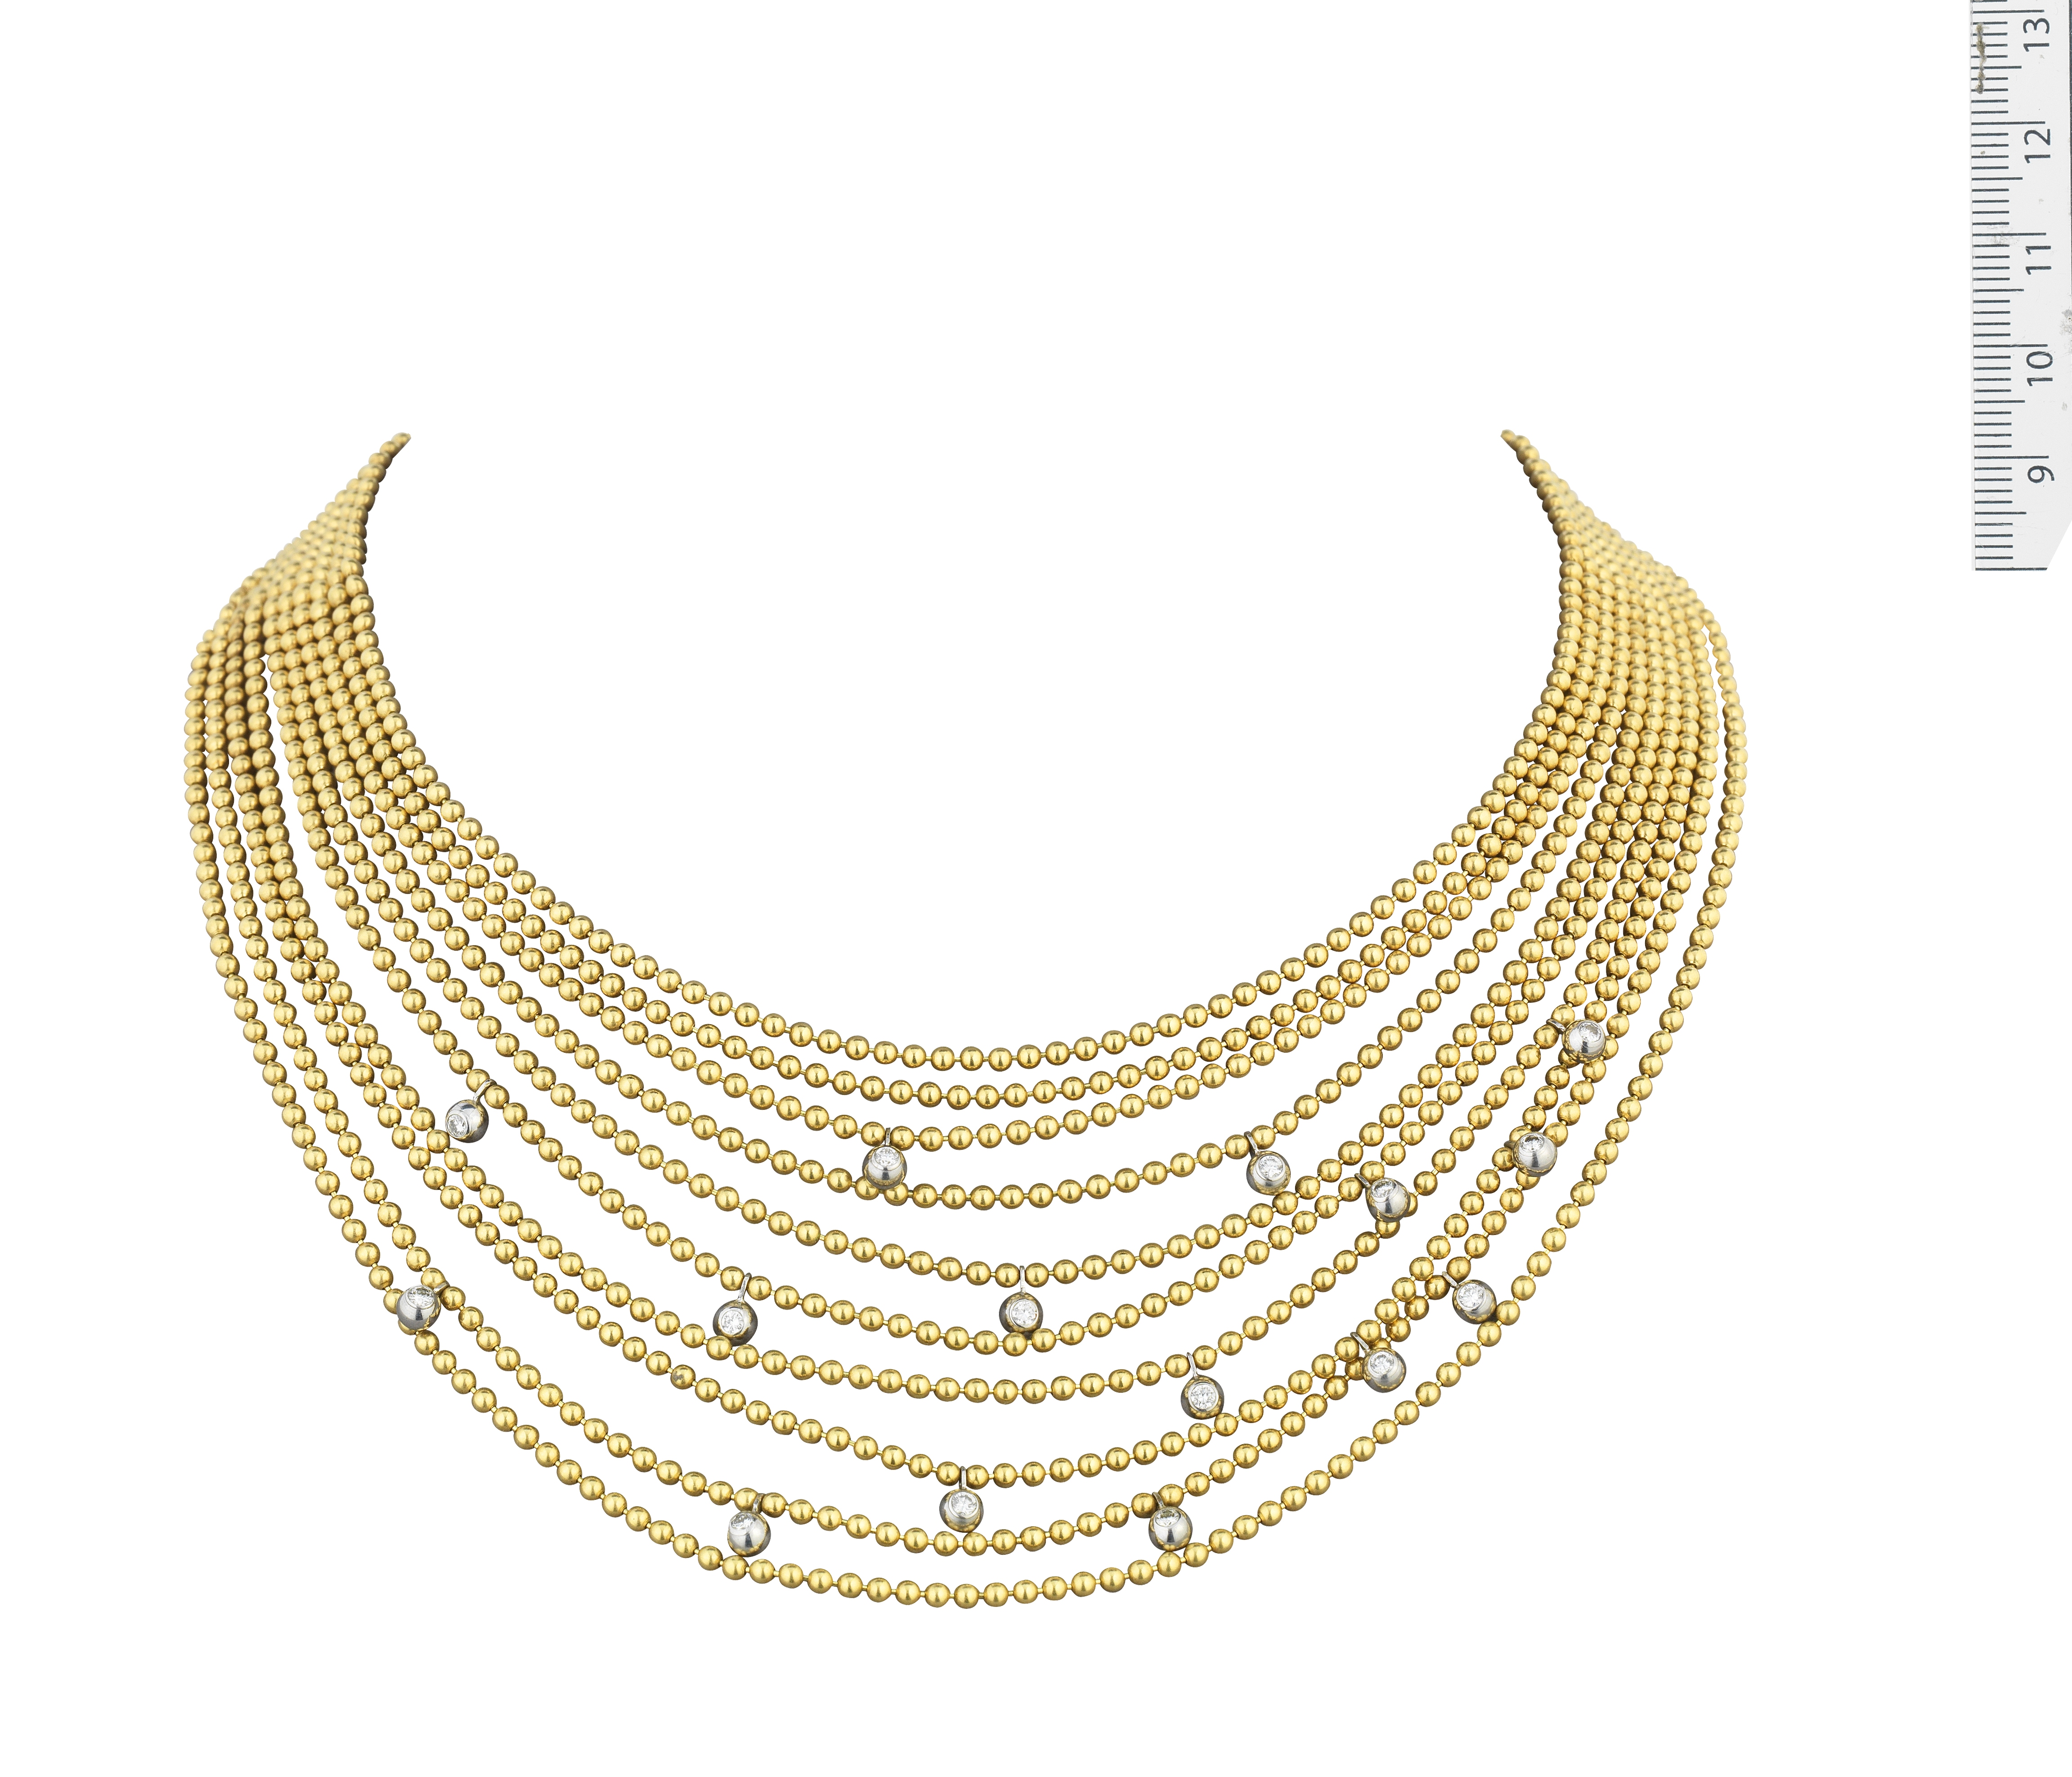 A 'DRAPERIE' NECKLACE, BY CARTIER